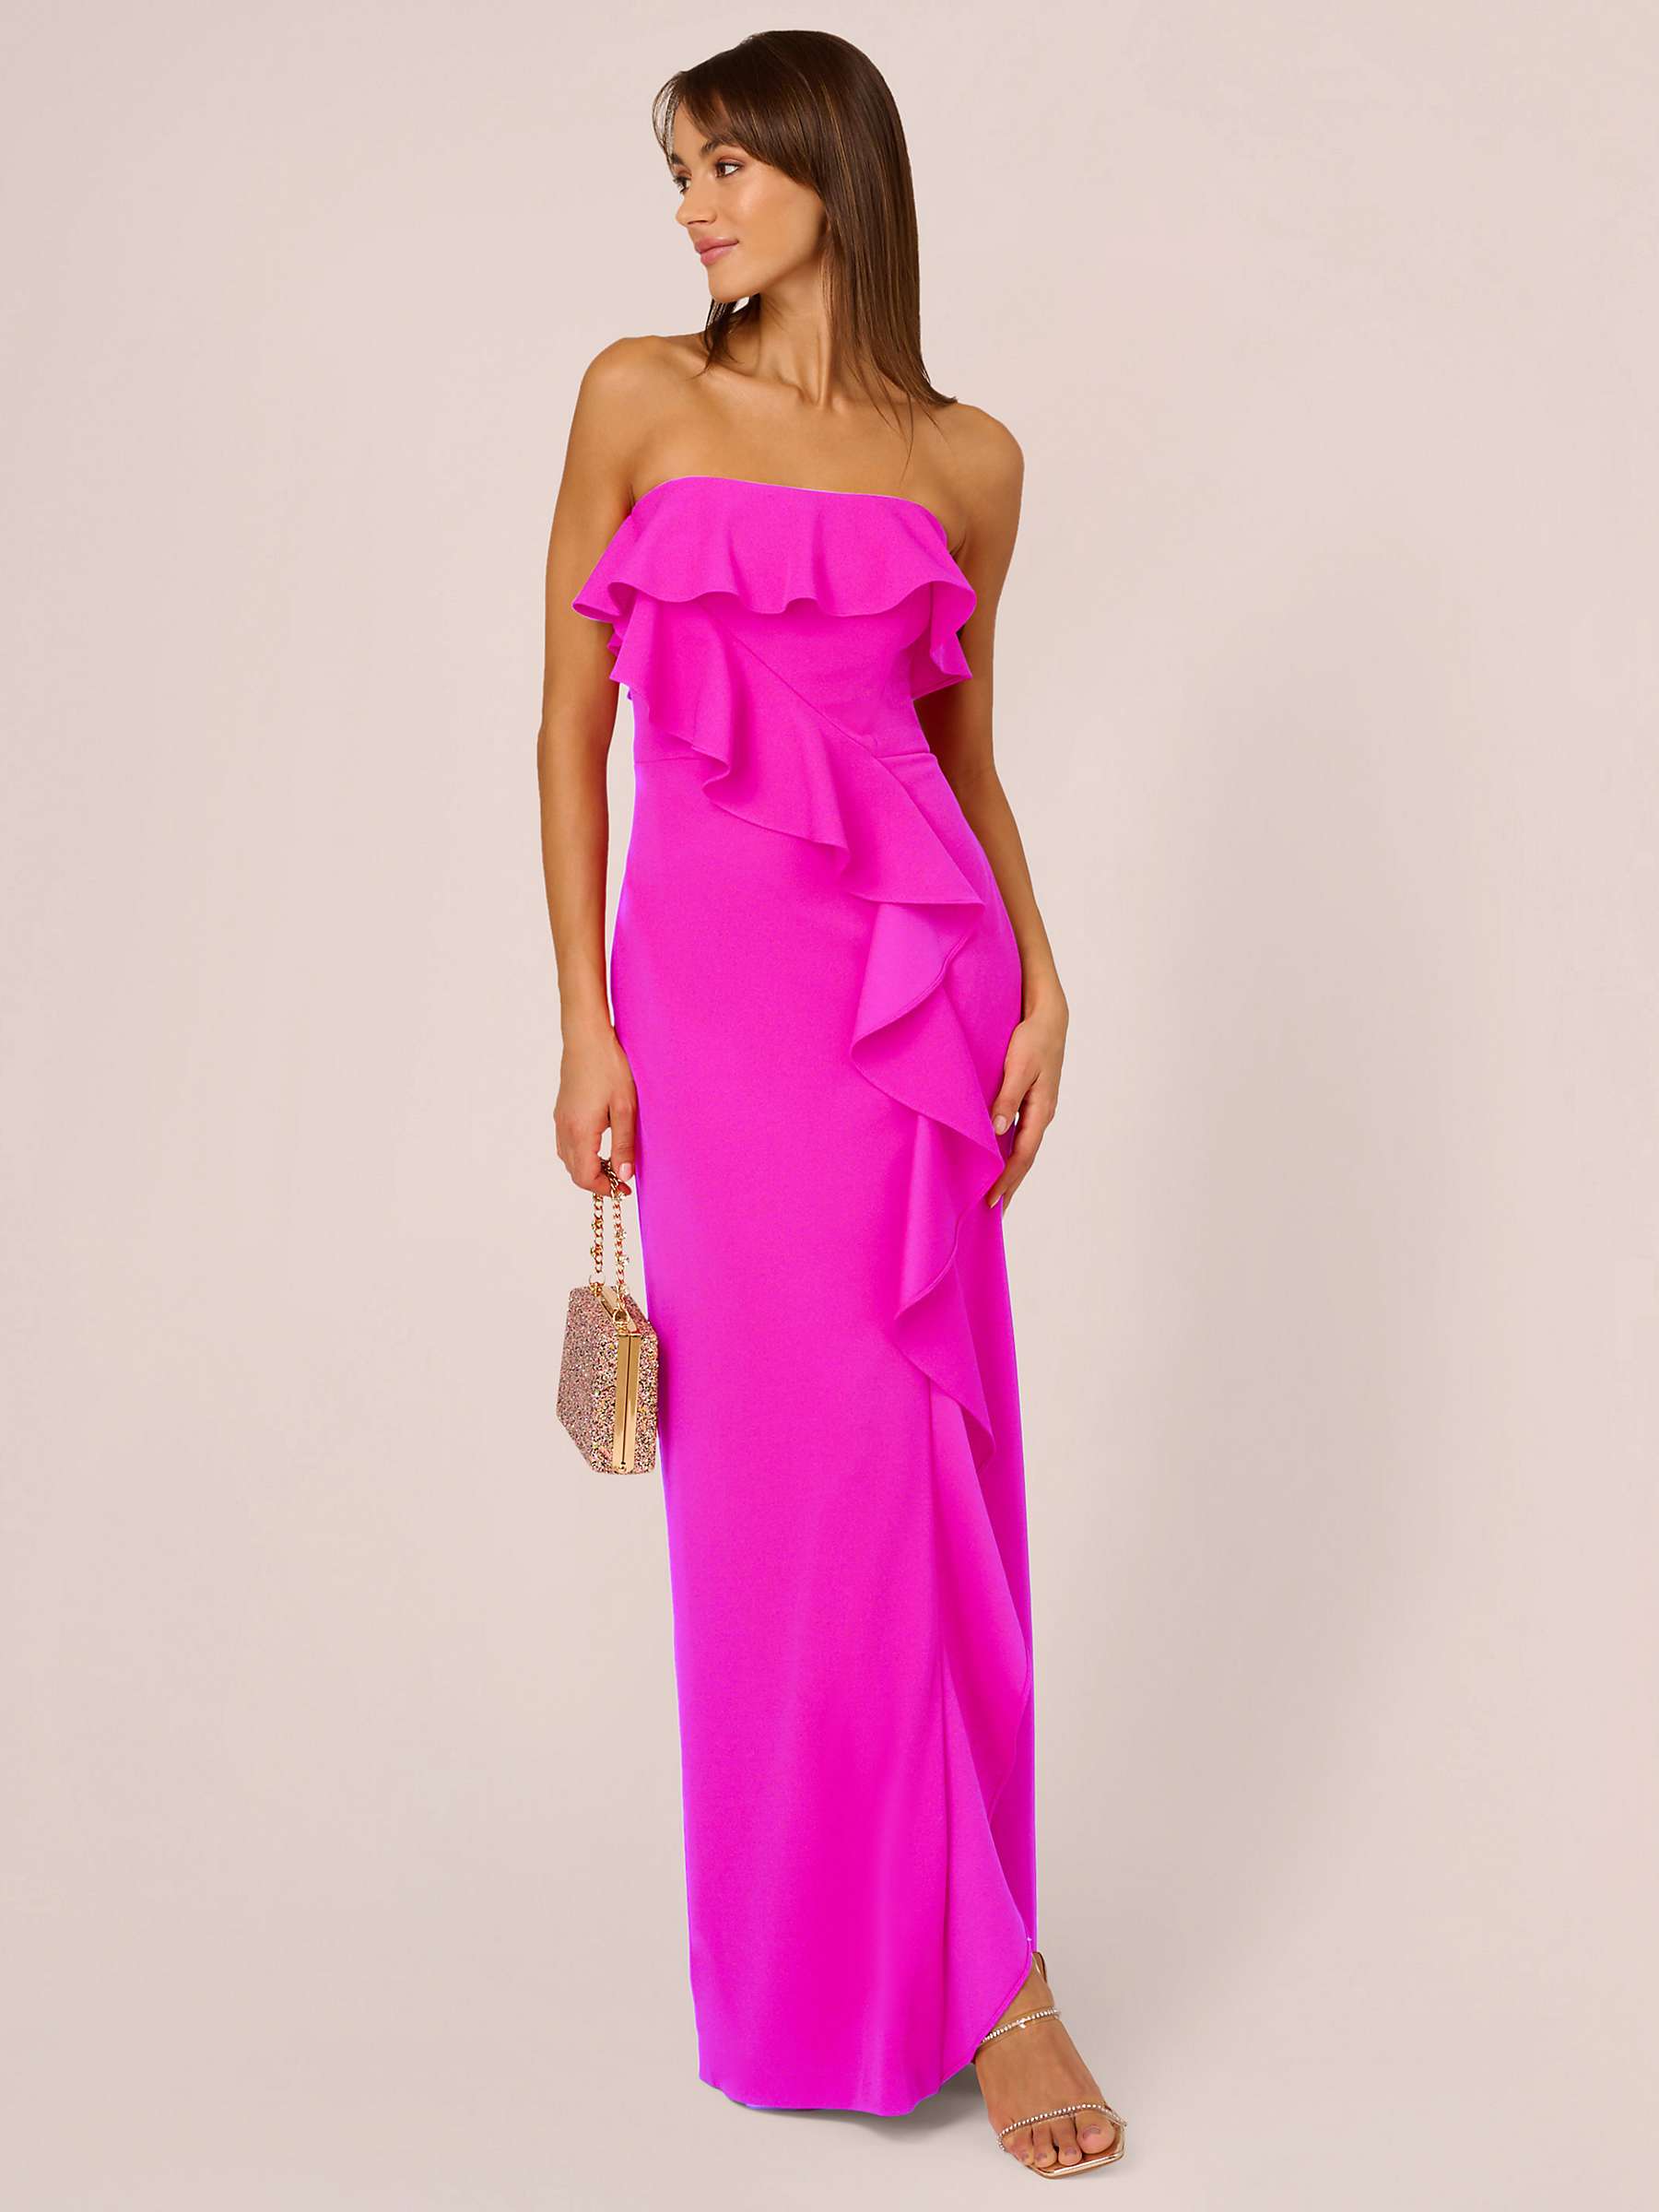 Buy Adrianna by Adrianna Papell Stretch Crepe Ruffle Column Maxi Dress Online at johnlewis.com